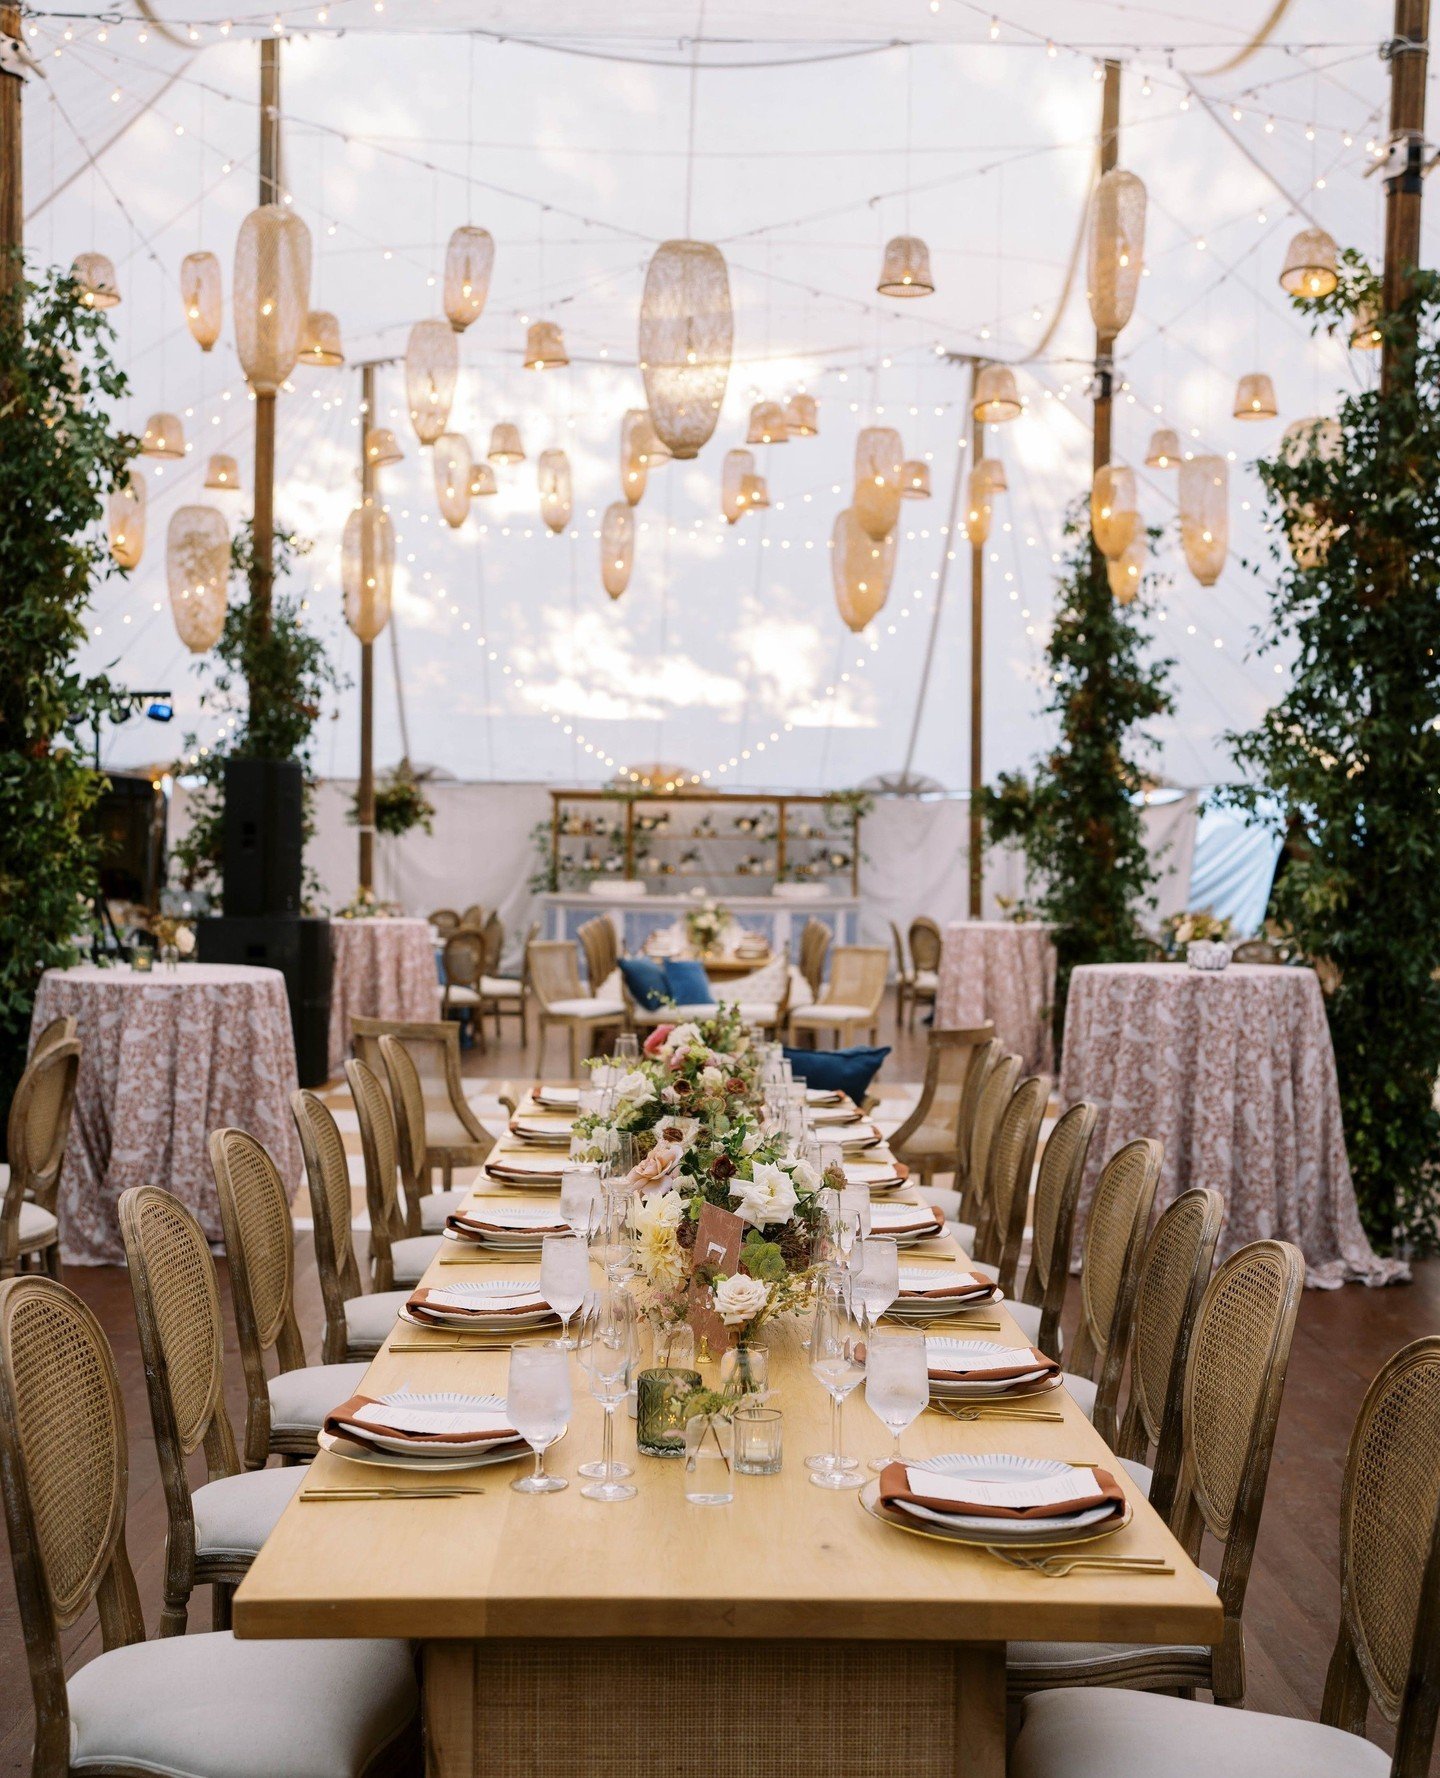 c+t's fall reception ✨️ ⁠
⁠
📷: @ashley.p.cox ⁠
.⁠
.⁠
.⁠
stationery: @saralanedesign ⁠
venue: @thecliftonva ⁠
florals: @cultivateeventco ⁠
rentals: @smthingvintage⁠
video: @yeattes_productions